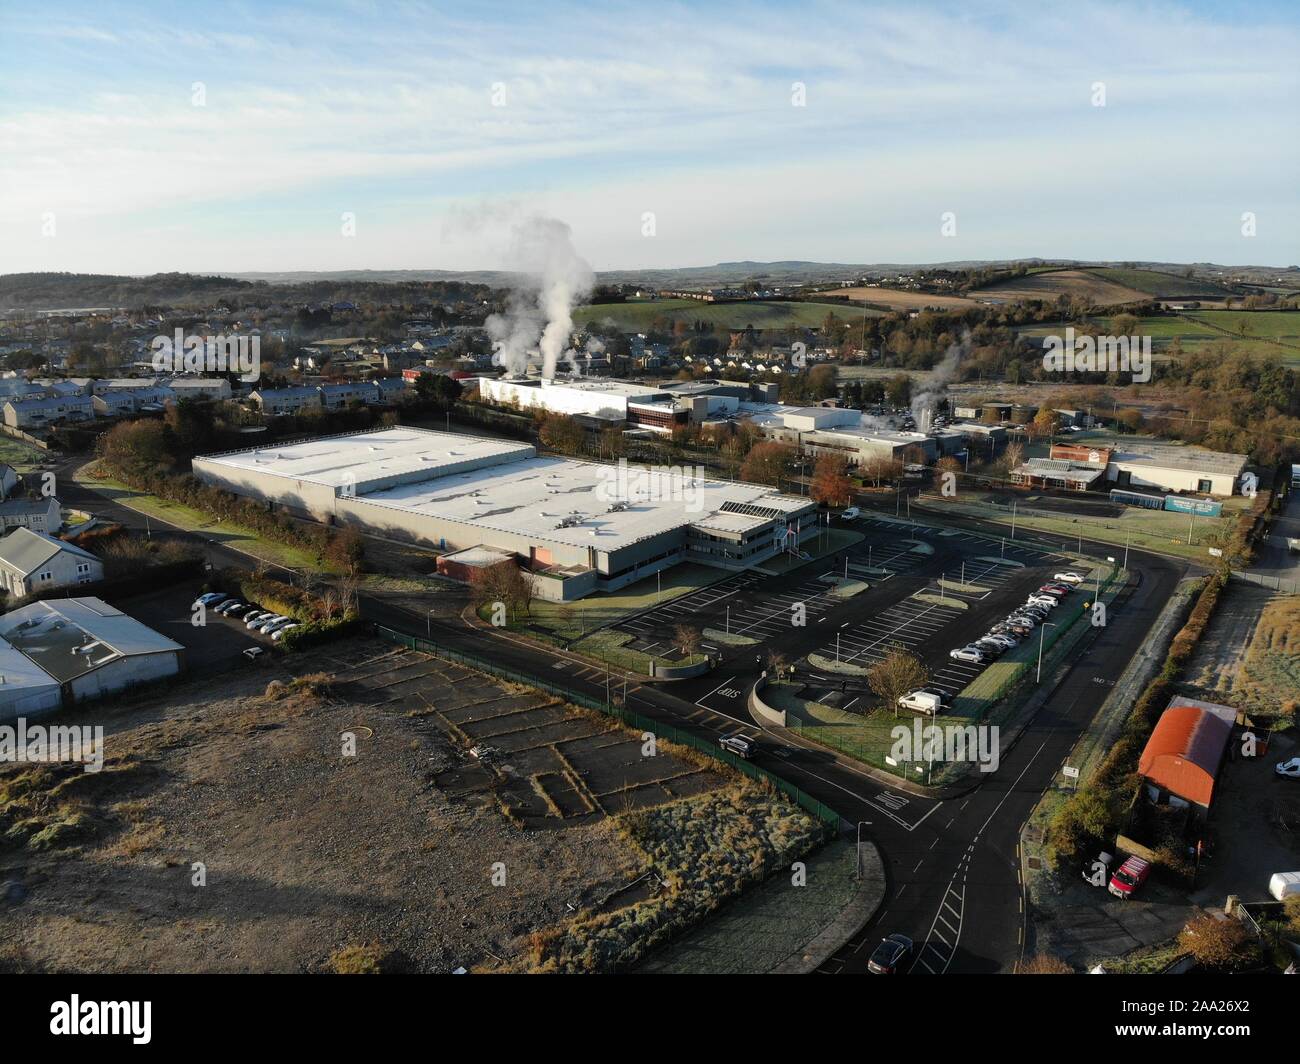 (191119) -- DUBLIN, Nov. 19, 2019 (Xinhua) -- Aerial photo taken on Nov. 18, 2019 shows an infant formula production factory in Monaghan, northeast Ireland. A ceremony to mark the completion of the construction of the infant formula production factory by a Chinese company was held in Ireland's northeast County Monaghan on Monday. Located in Carrickmacross, the second largest town in County Monaghan, the new factory with an investment of over 20 million euros (about 22 million U.S. dollars), which is fully funded by Shanghai Newbaze Dairy Product Co., Ltd. (SNDP), a private infant formula pr Stock Photo